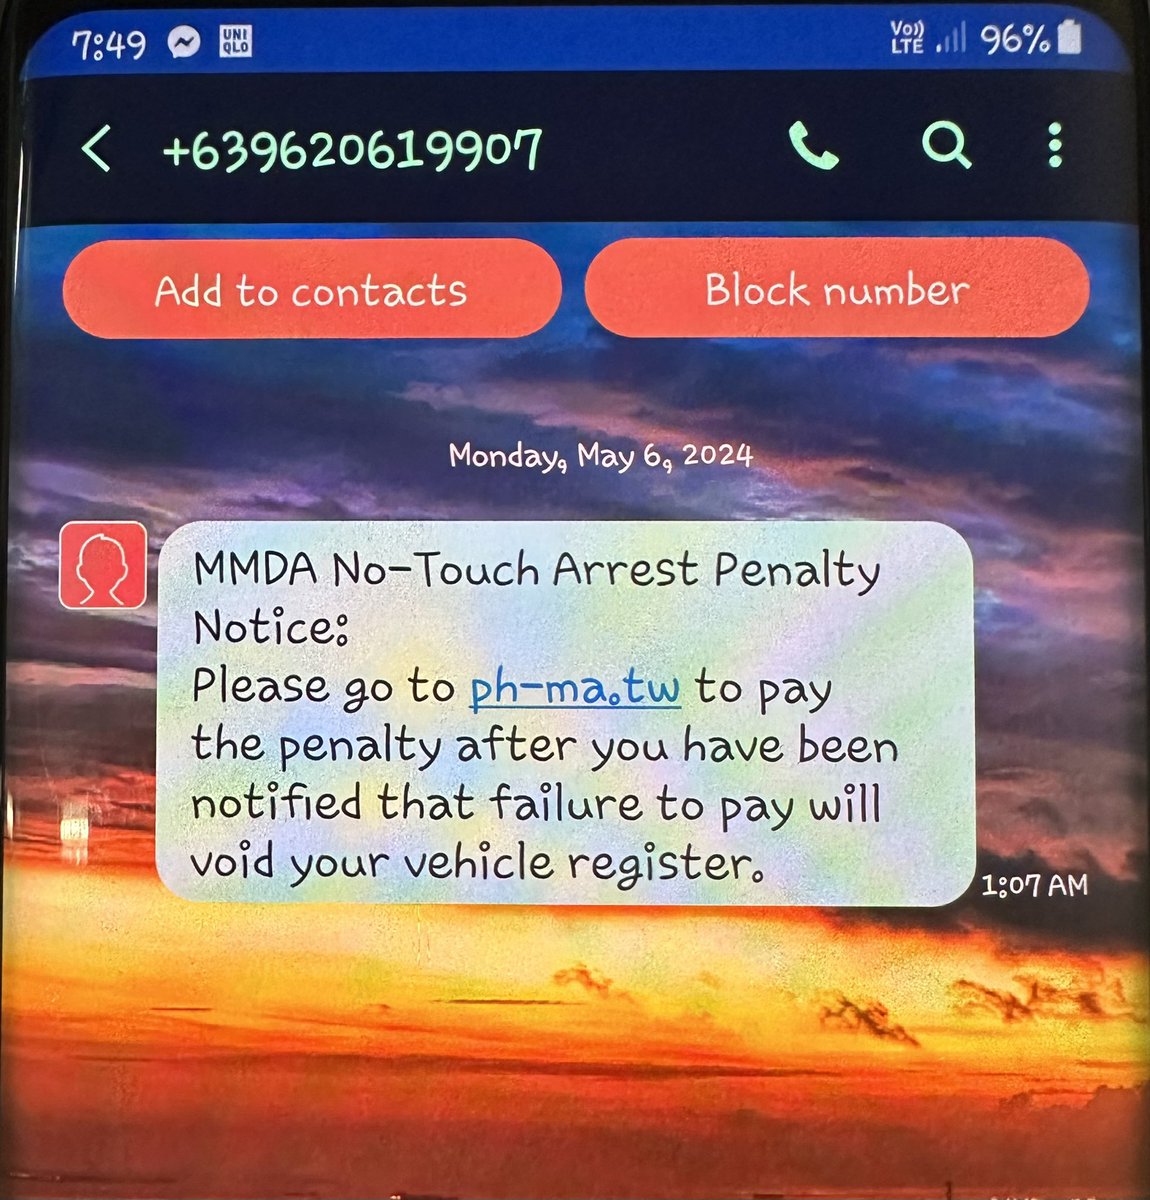 Good am @MMDA received 2 text notification today what’s the action of @enjoyGLOBE @SMARTCares . Since we already registered our sim cards. 😒